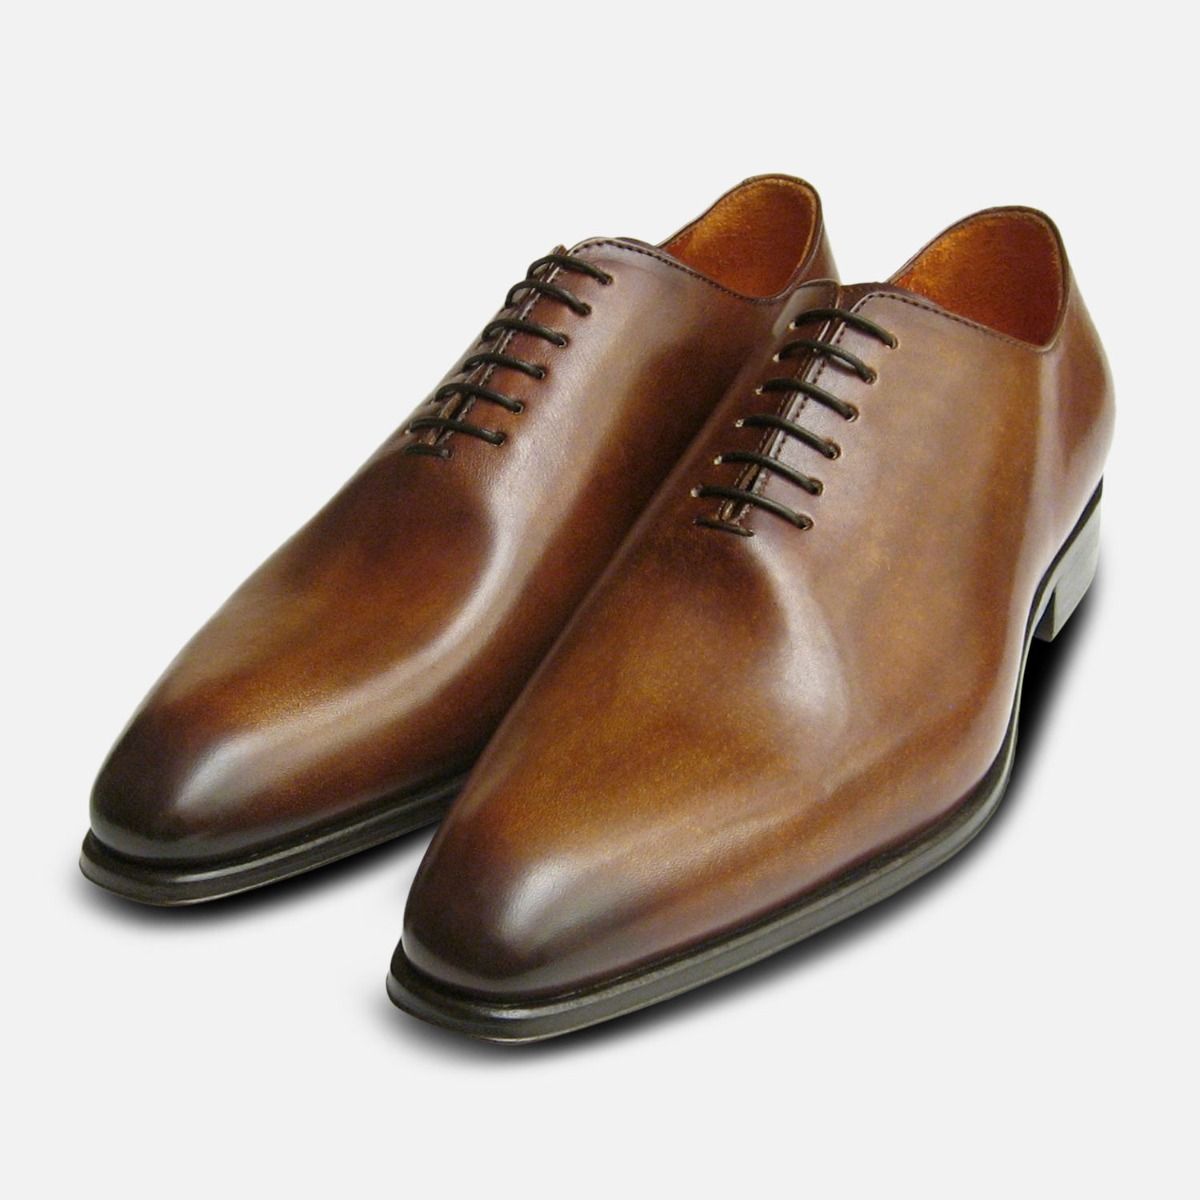 cut shoes for mens